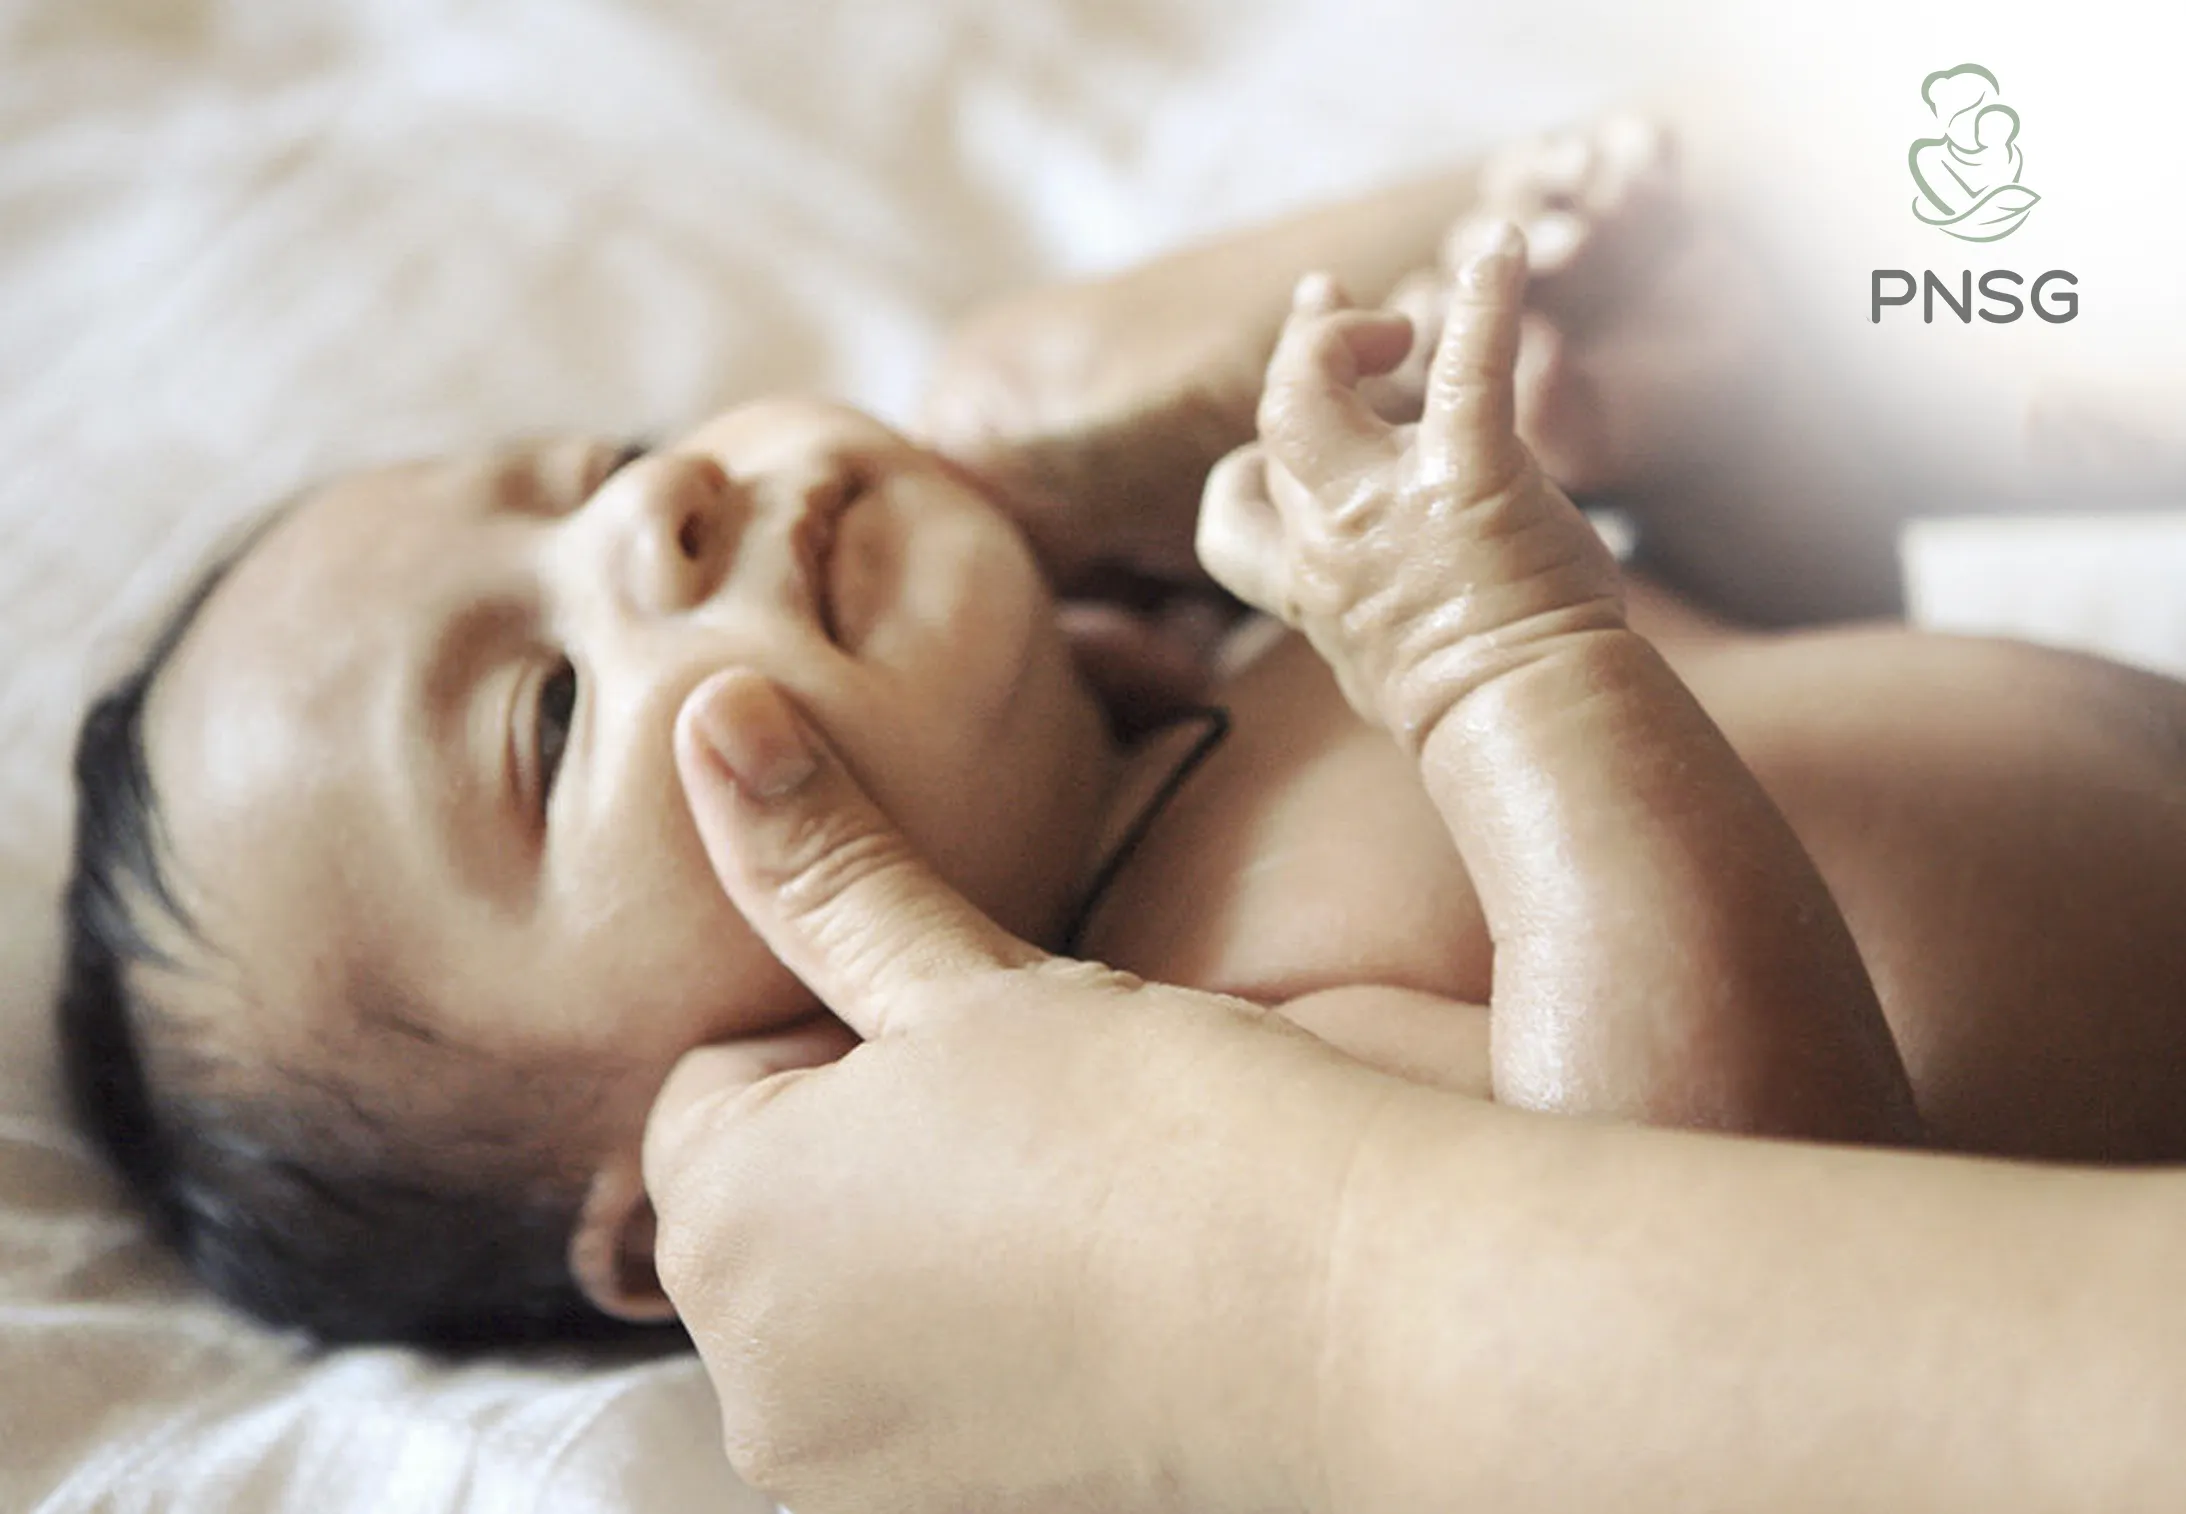 Is Newborn Massage Safe? 7 Things to Take Note of - PNSG Singapore